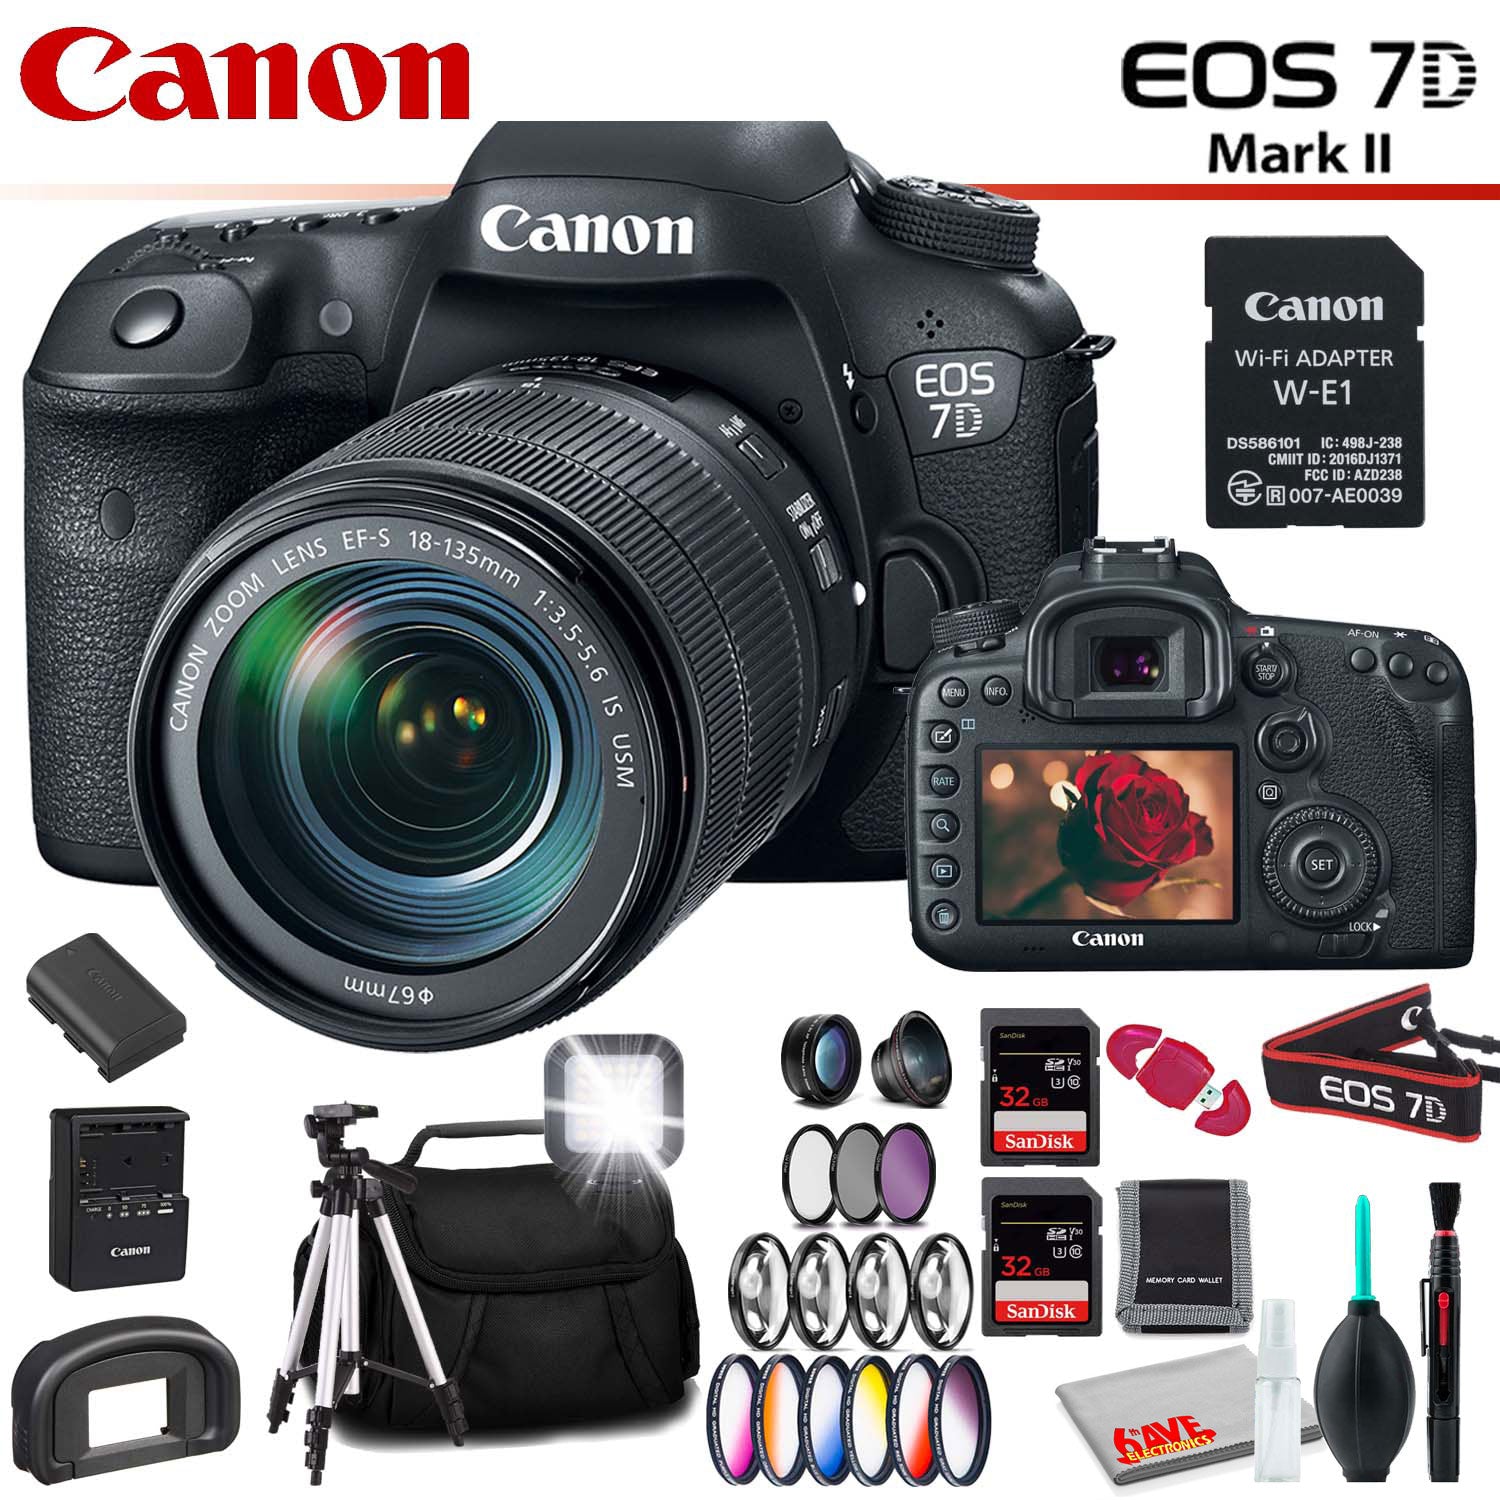 Canon EOS 7D Mark II DSLR Camera with 18-135mm Lens & W-E1 Wi-Fi Adapter With Memory Card Kit